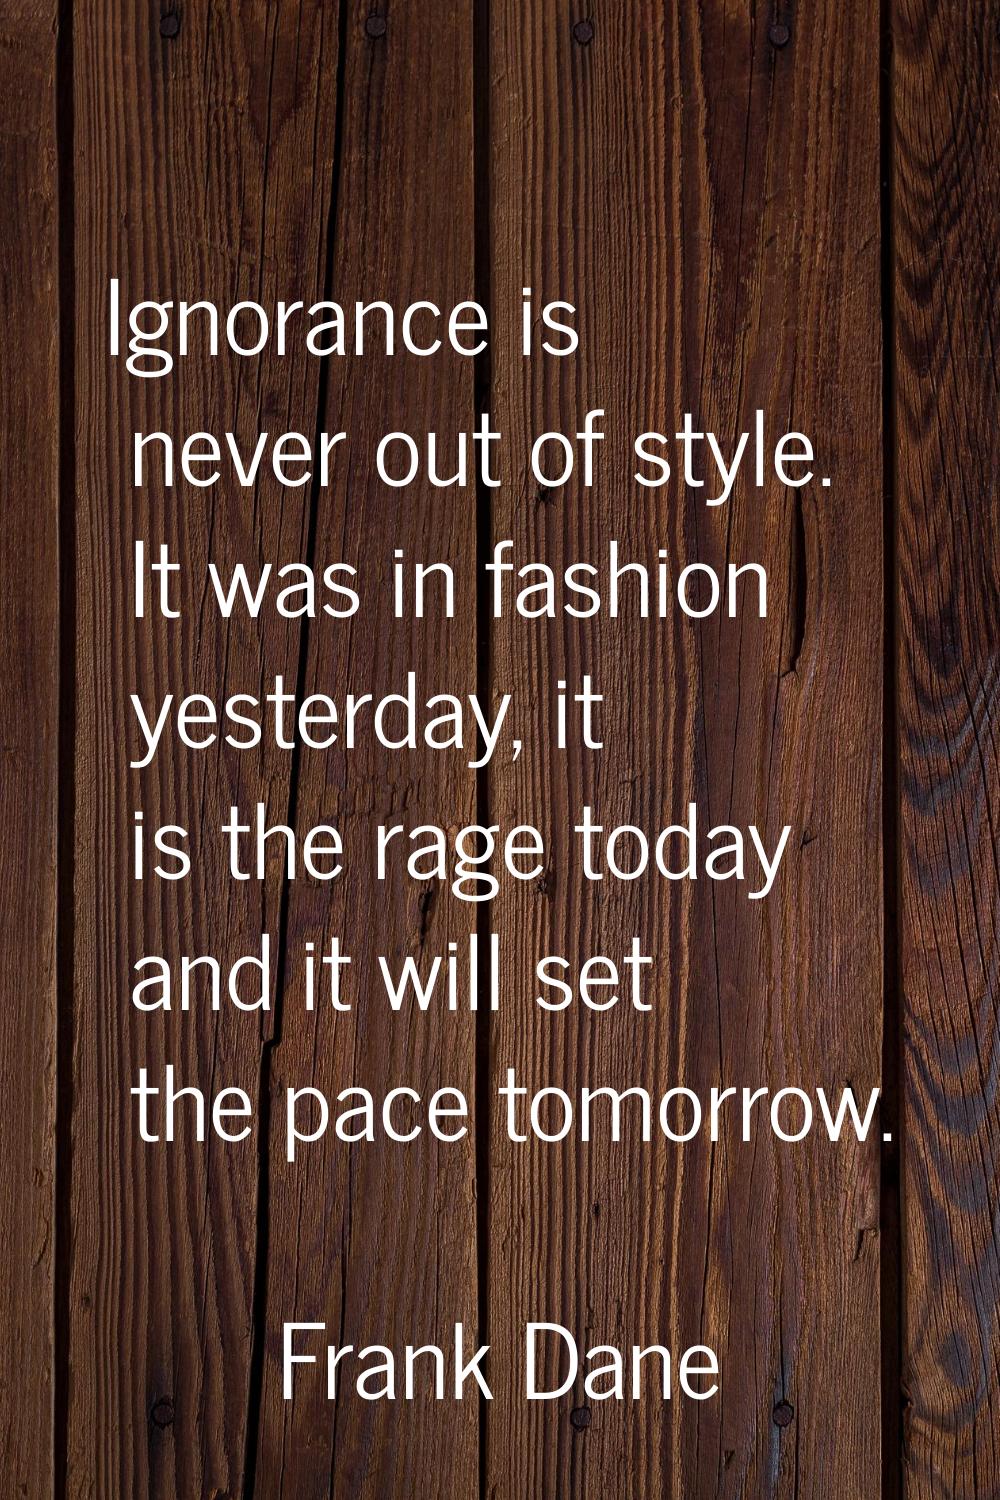 Ignorance is never out of style. It was in fashion yesterday, it is the rage today and it will set 